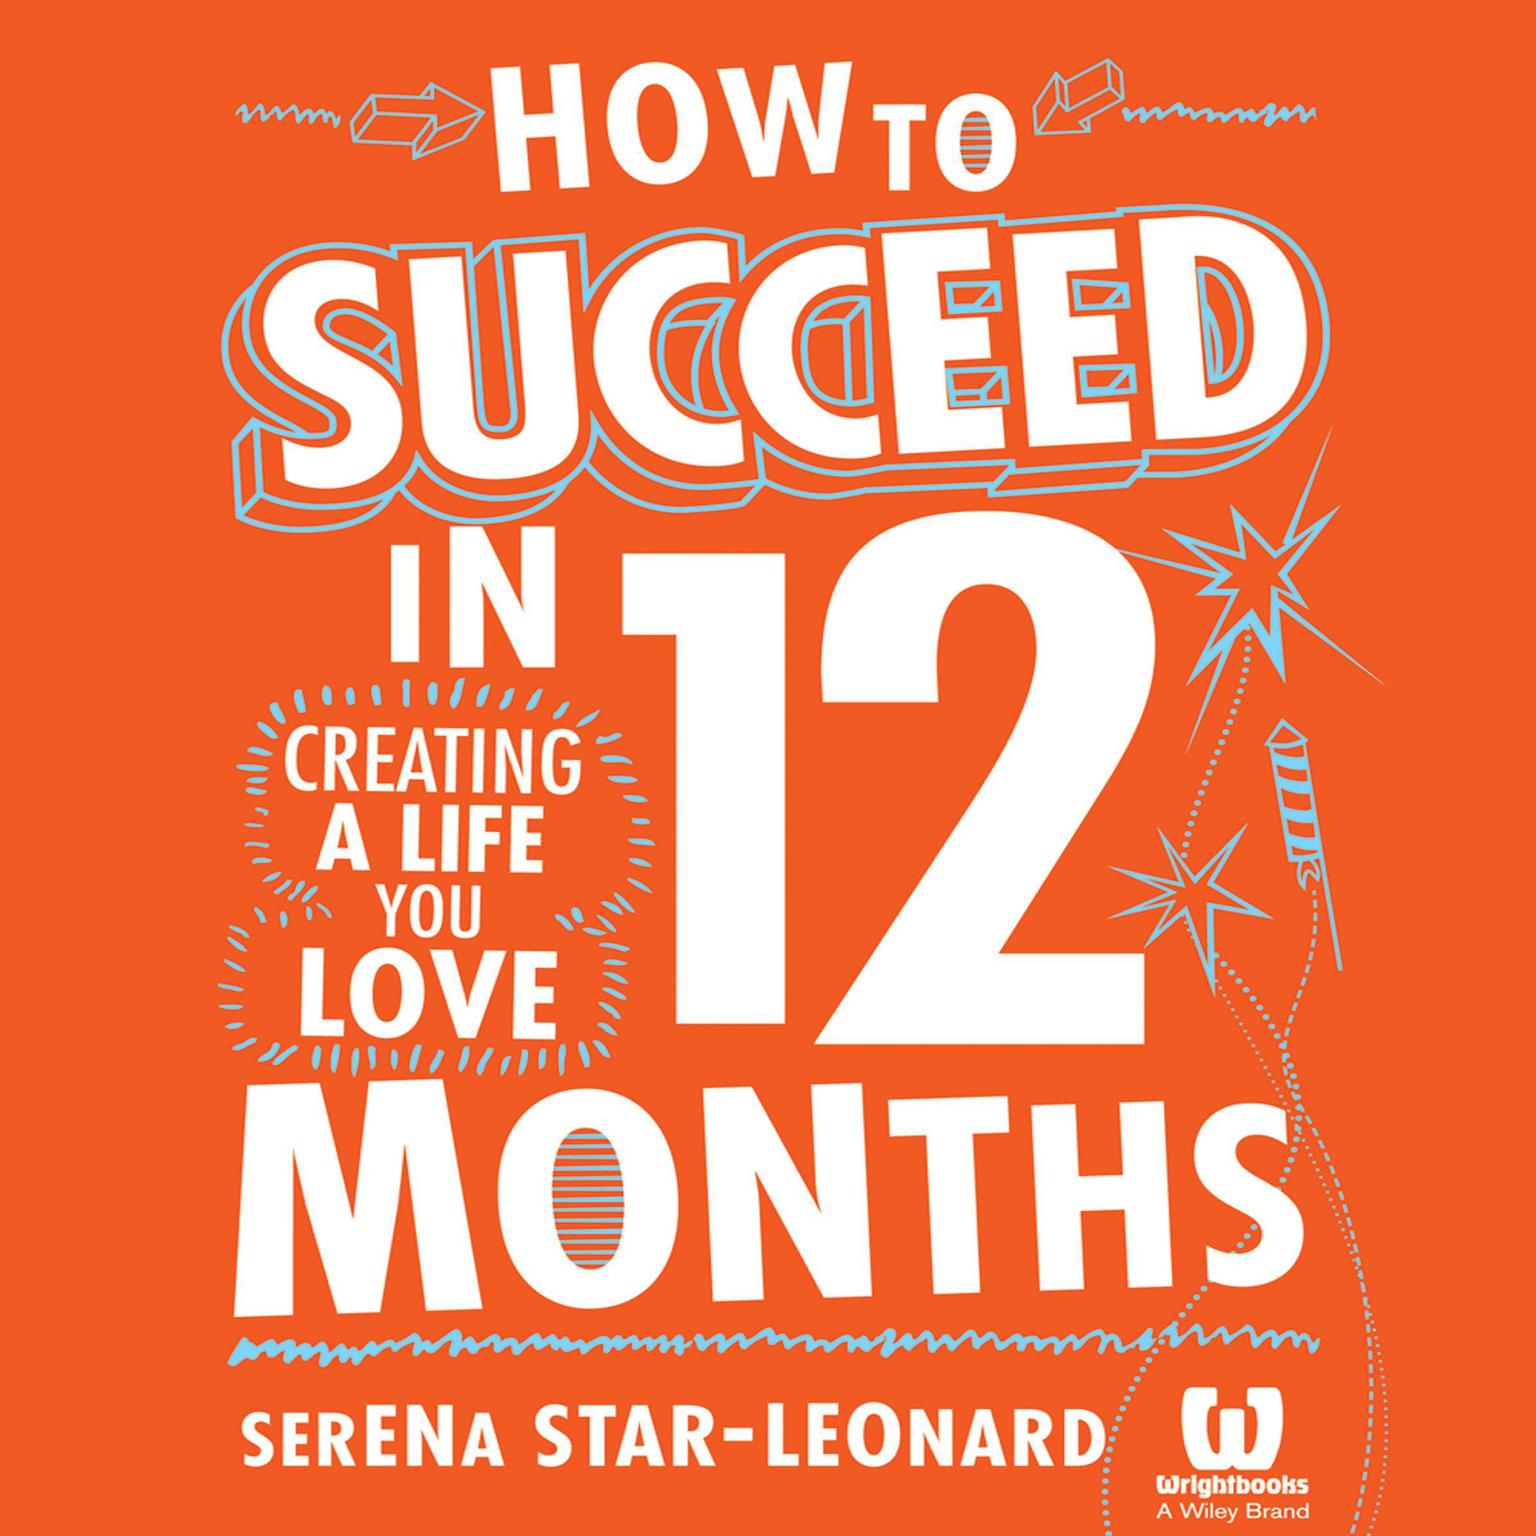 How to Succeed in 12 Months: Creating a Life You Love Audiobook, by Serena Star-Leonard